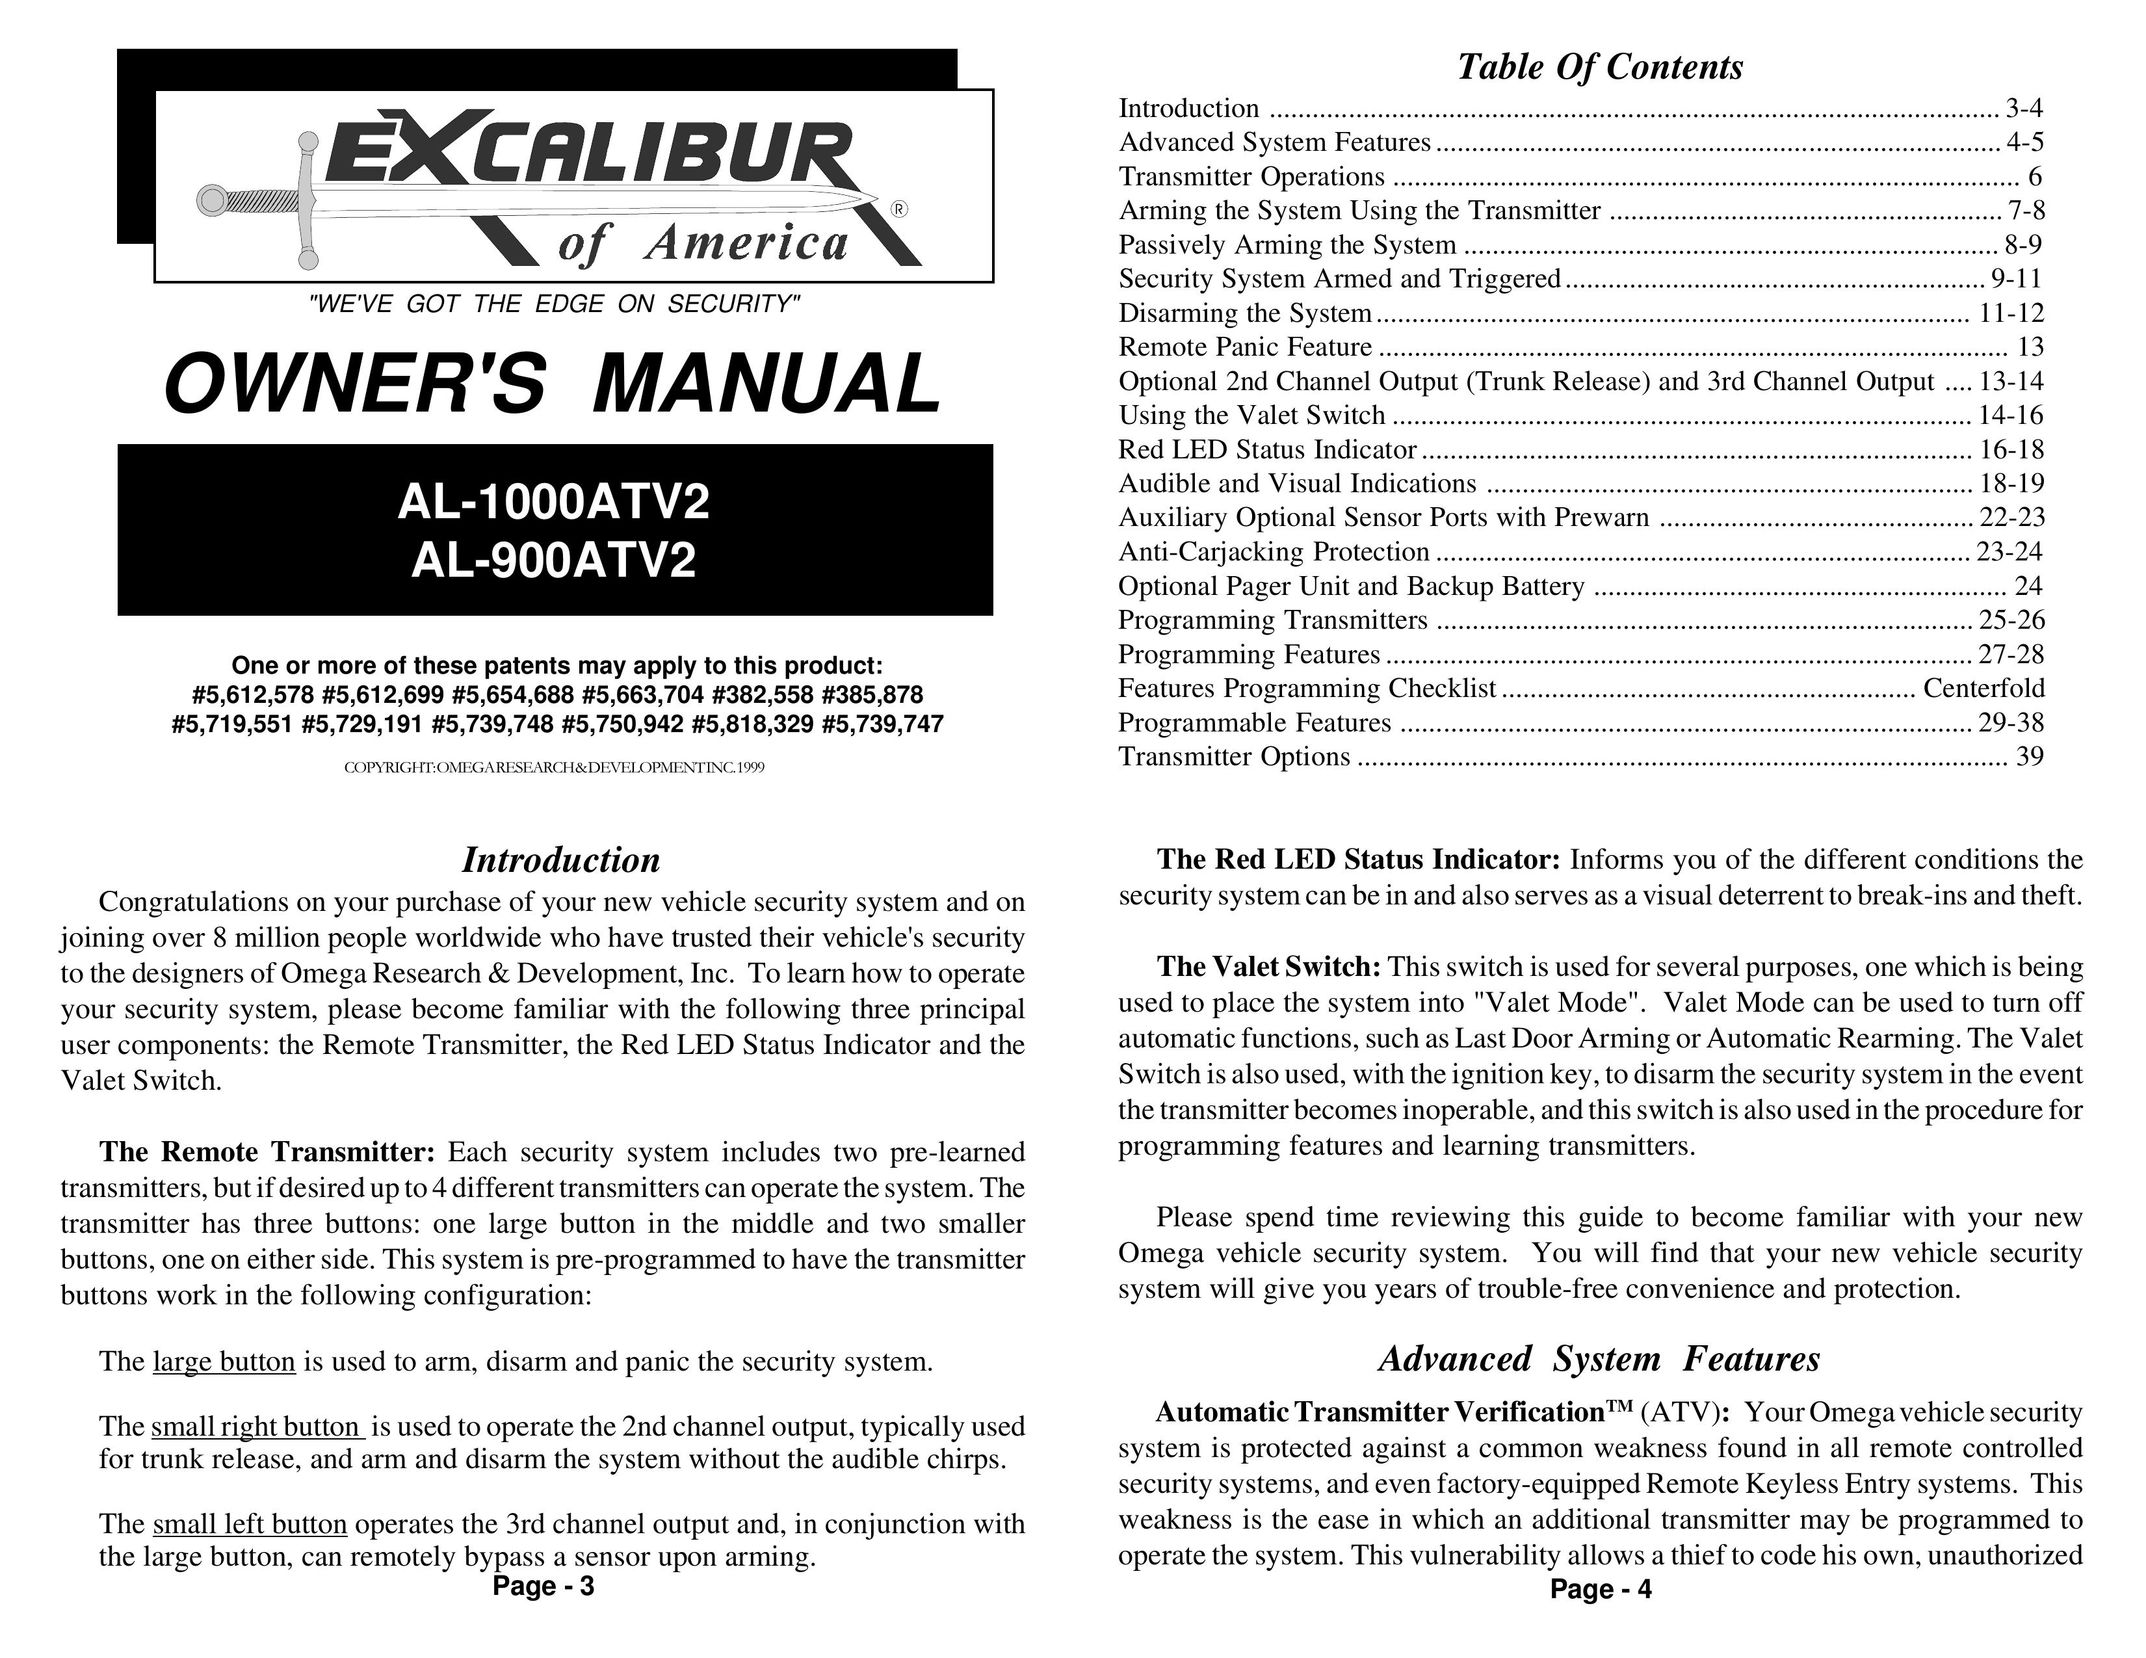 Excalibur electronic AL-1000ATV2 Home Security System User Manual